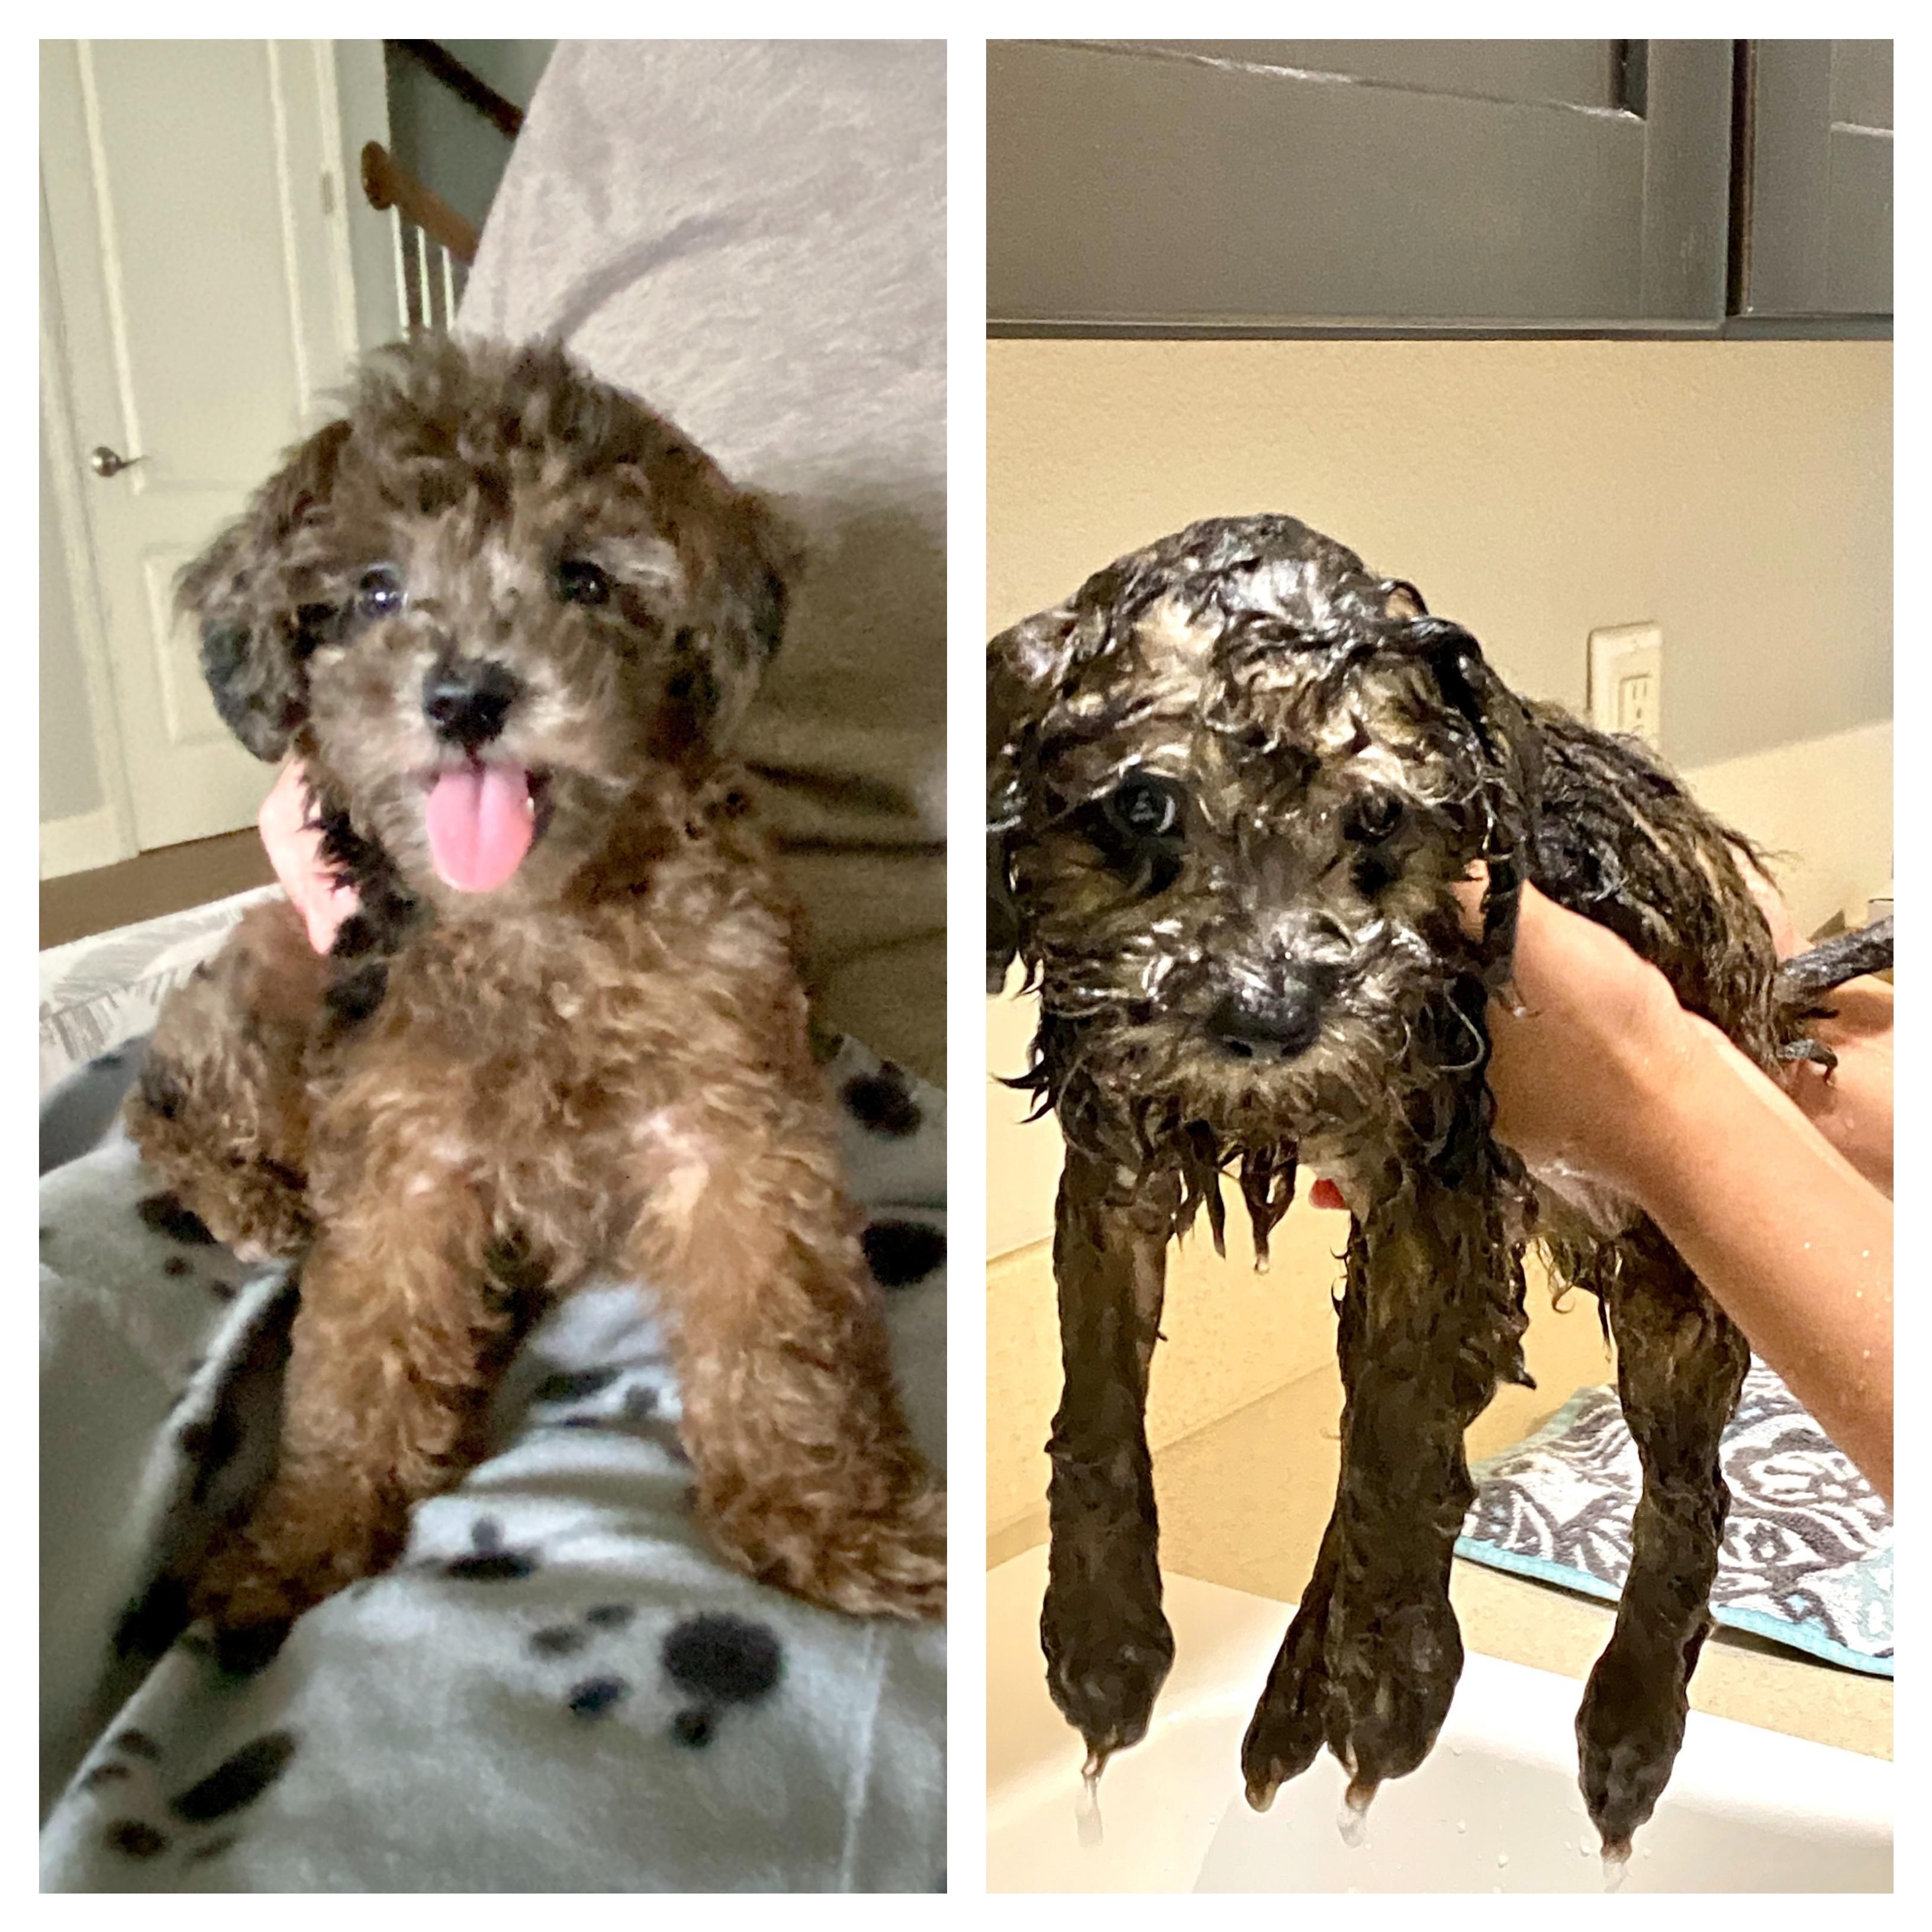 Gave my puppy his first bath today. He was not pleased.